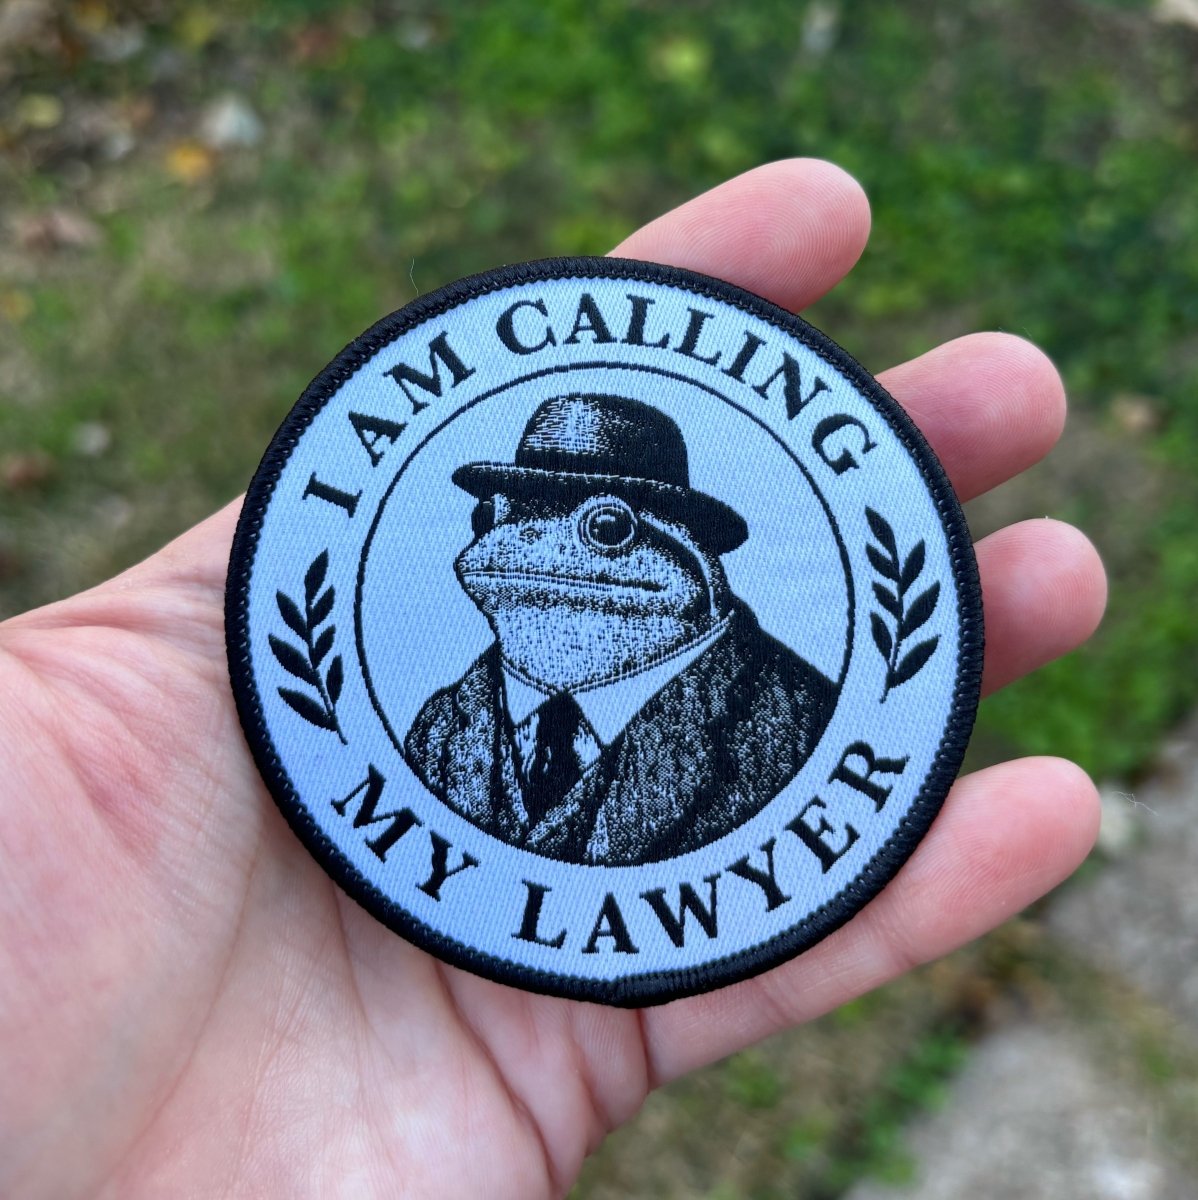 I am calling my lawyer patch - Patch - Pretty Bad Co.